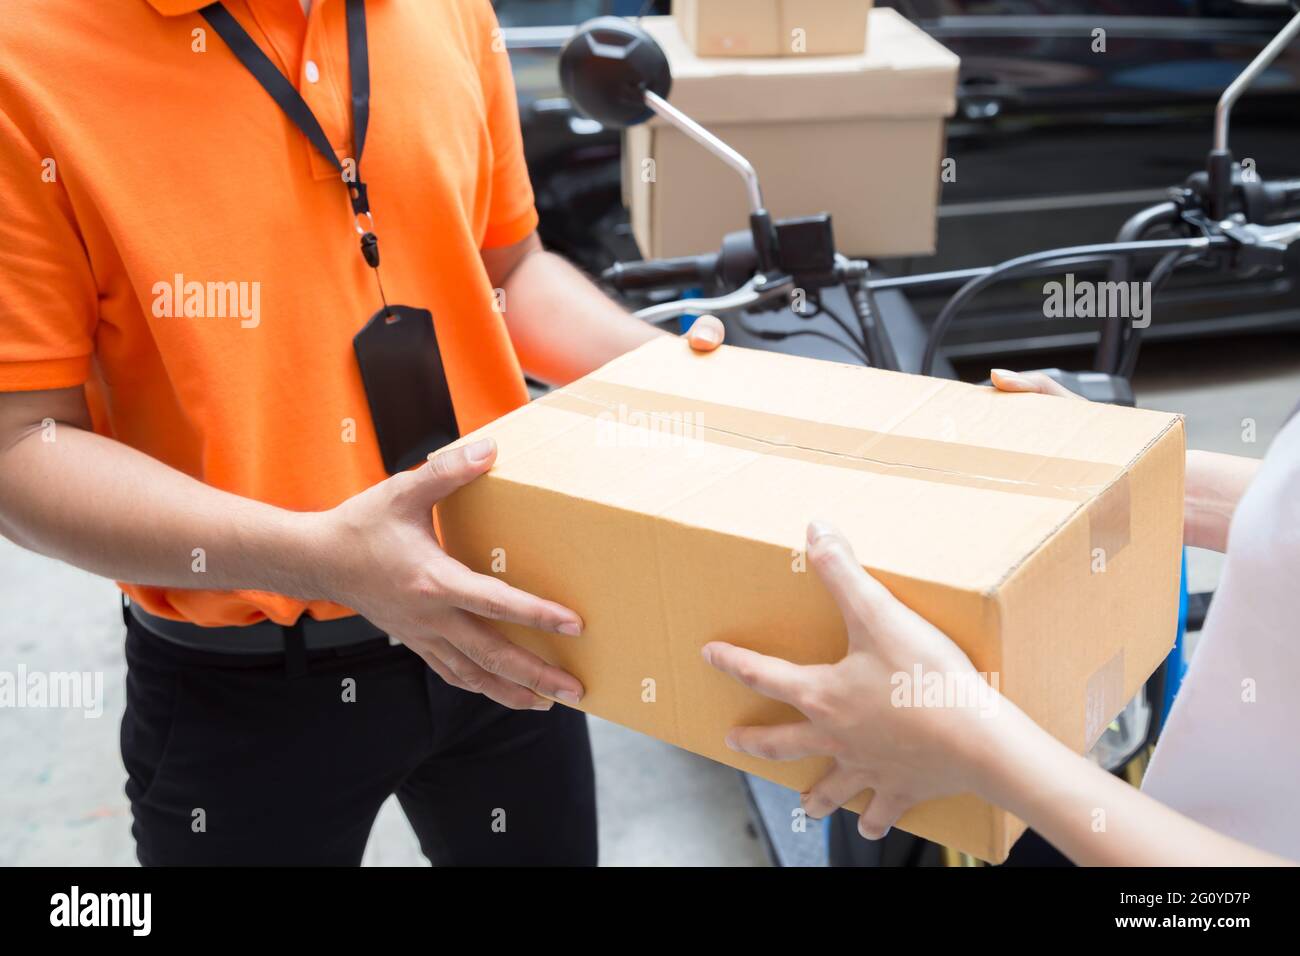 Woman hand accepting a delivery of boxes from deliveryman, Deliver goods by motorcycle service, Fast and Free Transport Stock Photo